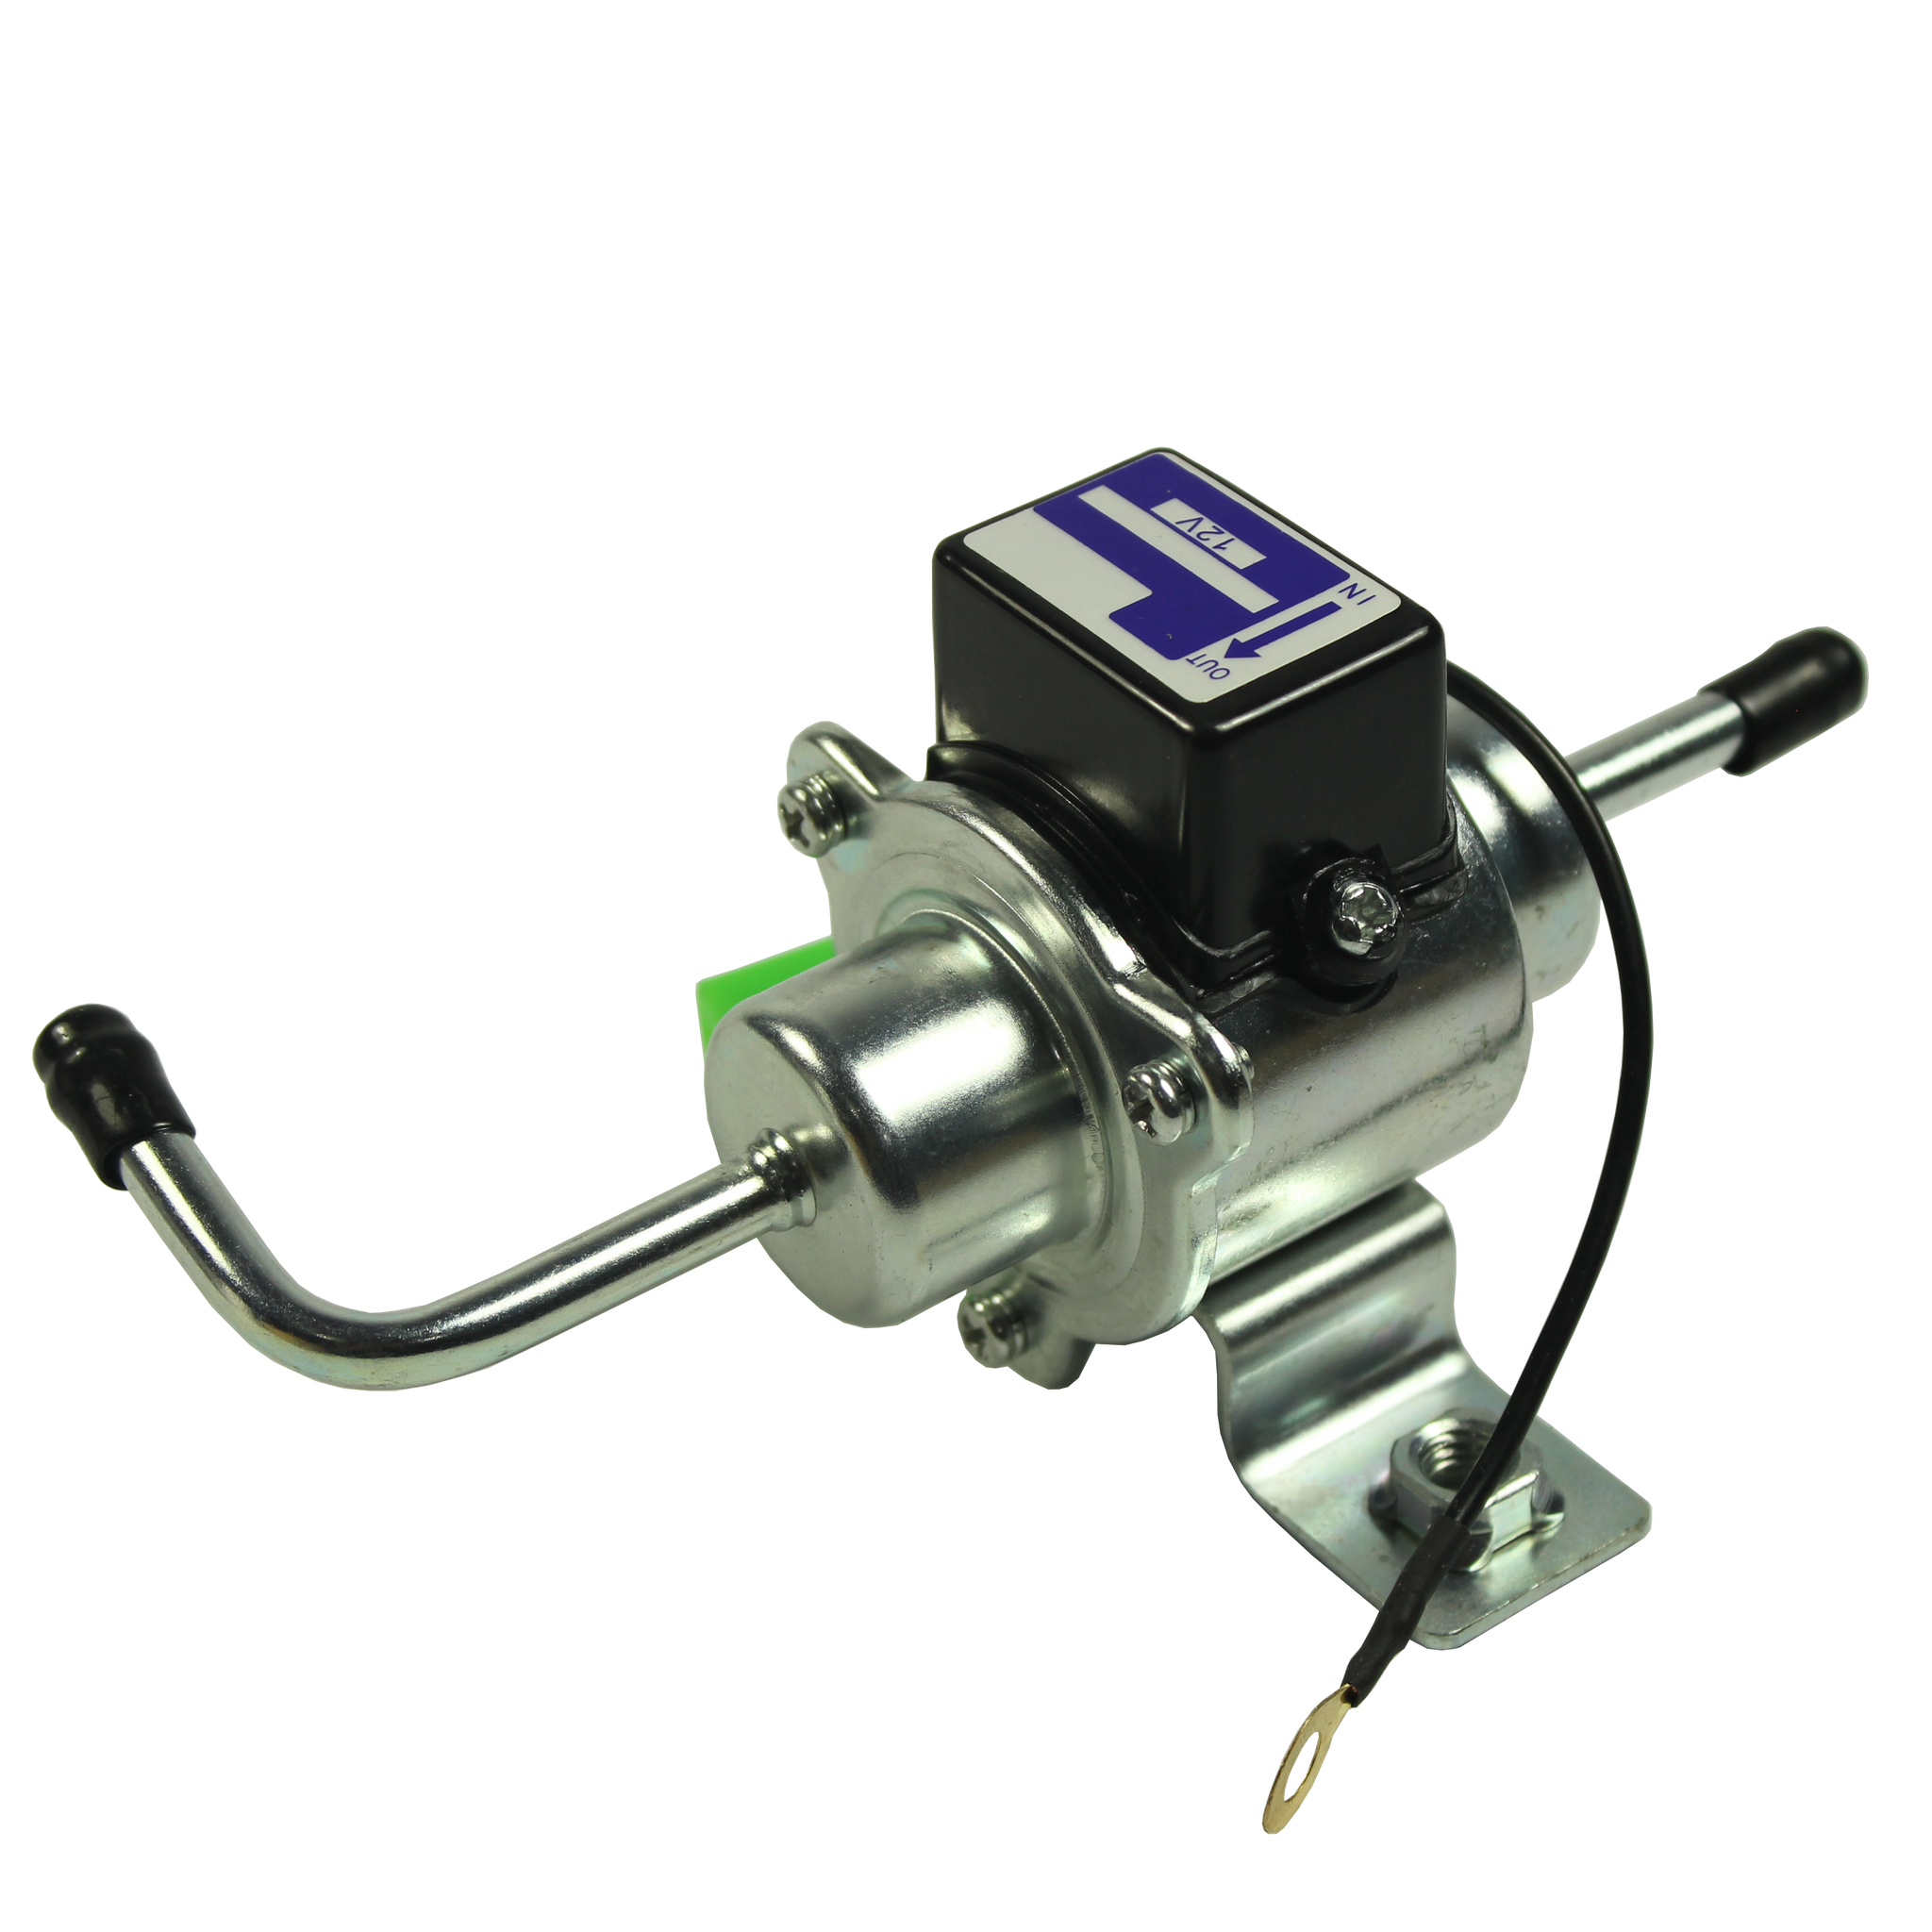 JDMSPEED 12V Heavy Duty Electric Fuel Pump Replacement For Motorcycle, ATV,  Trucks, Boats - Gasoline or Diesel Engines